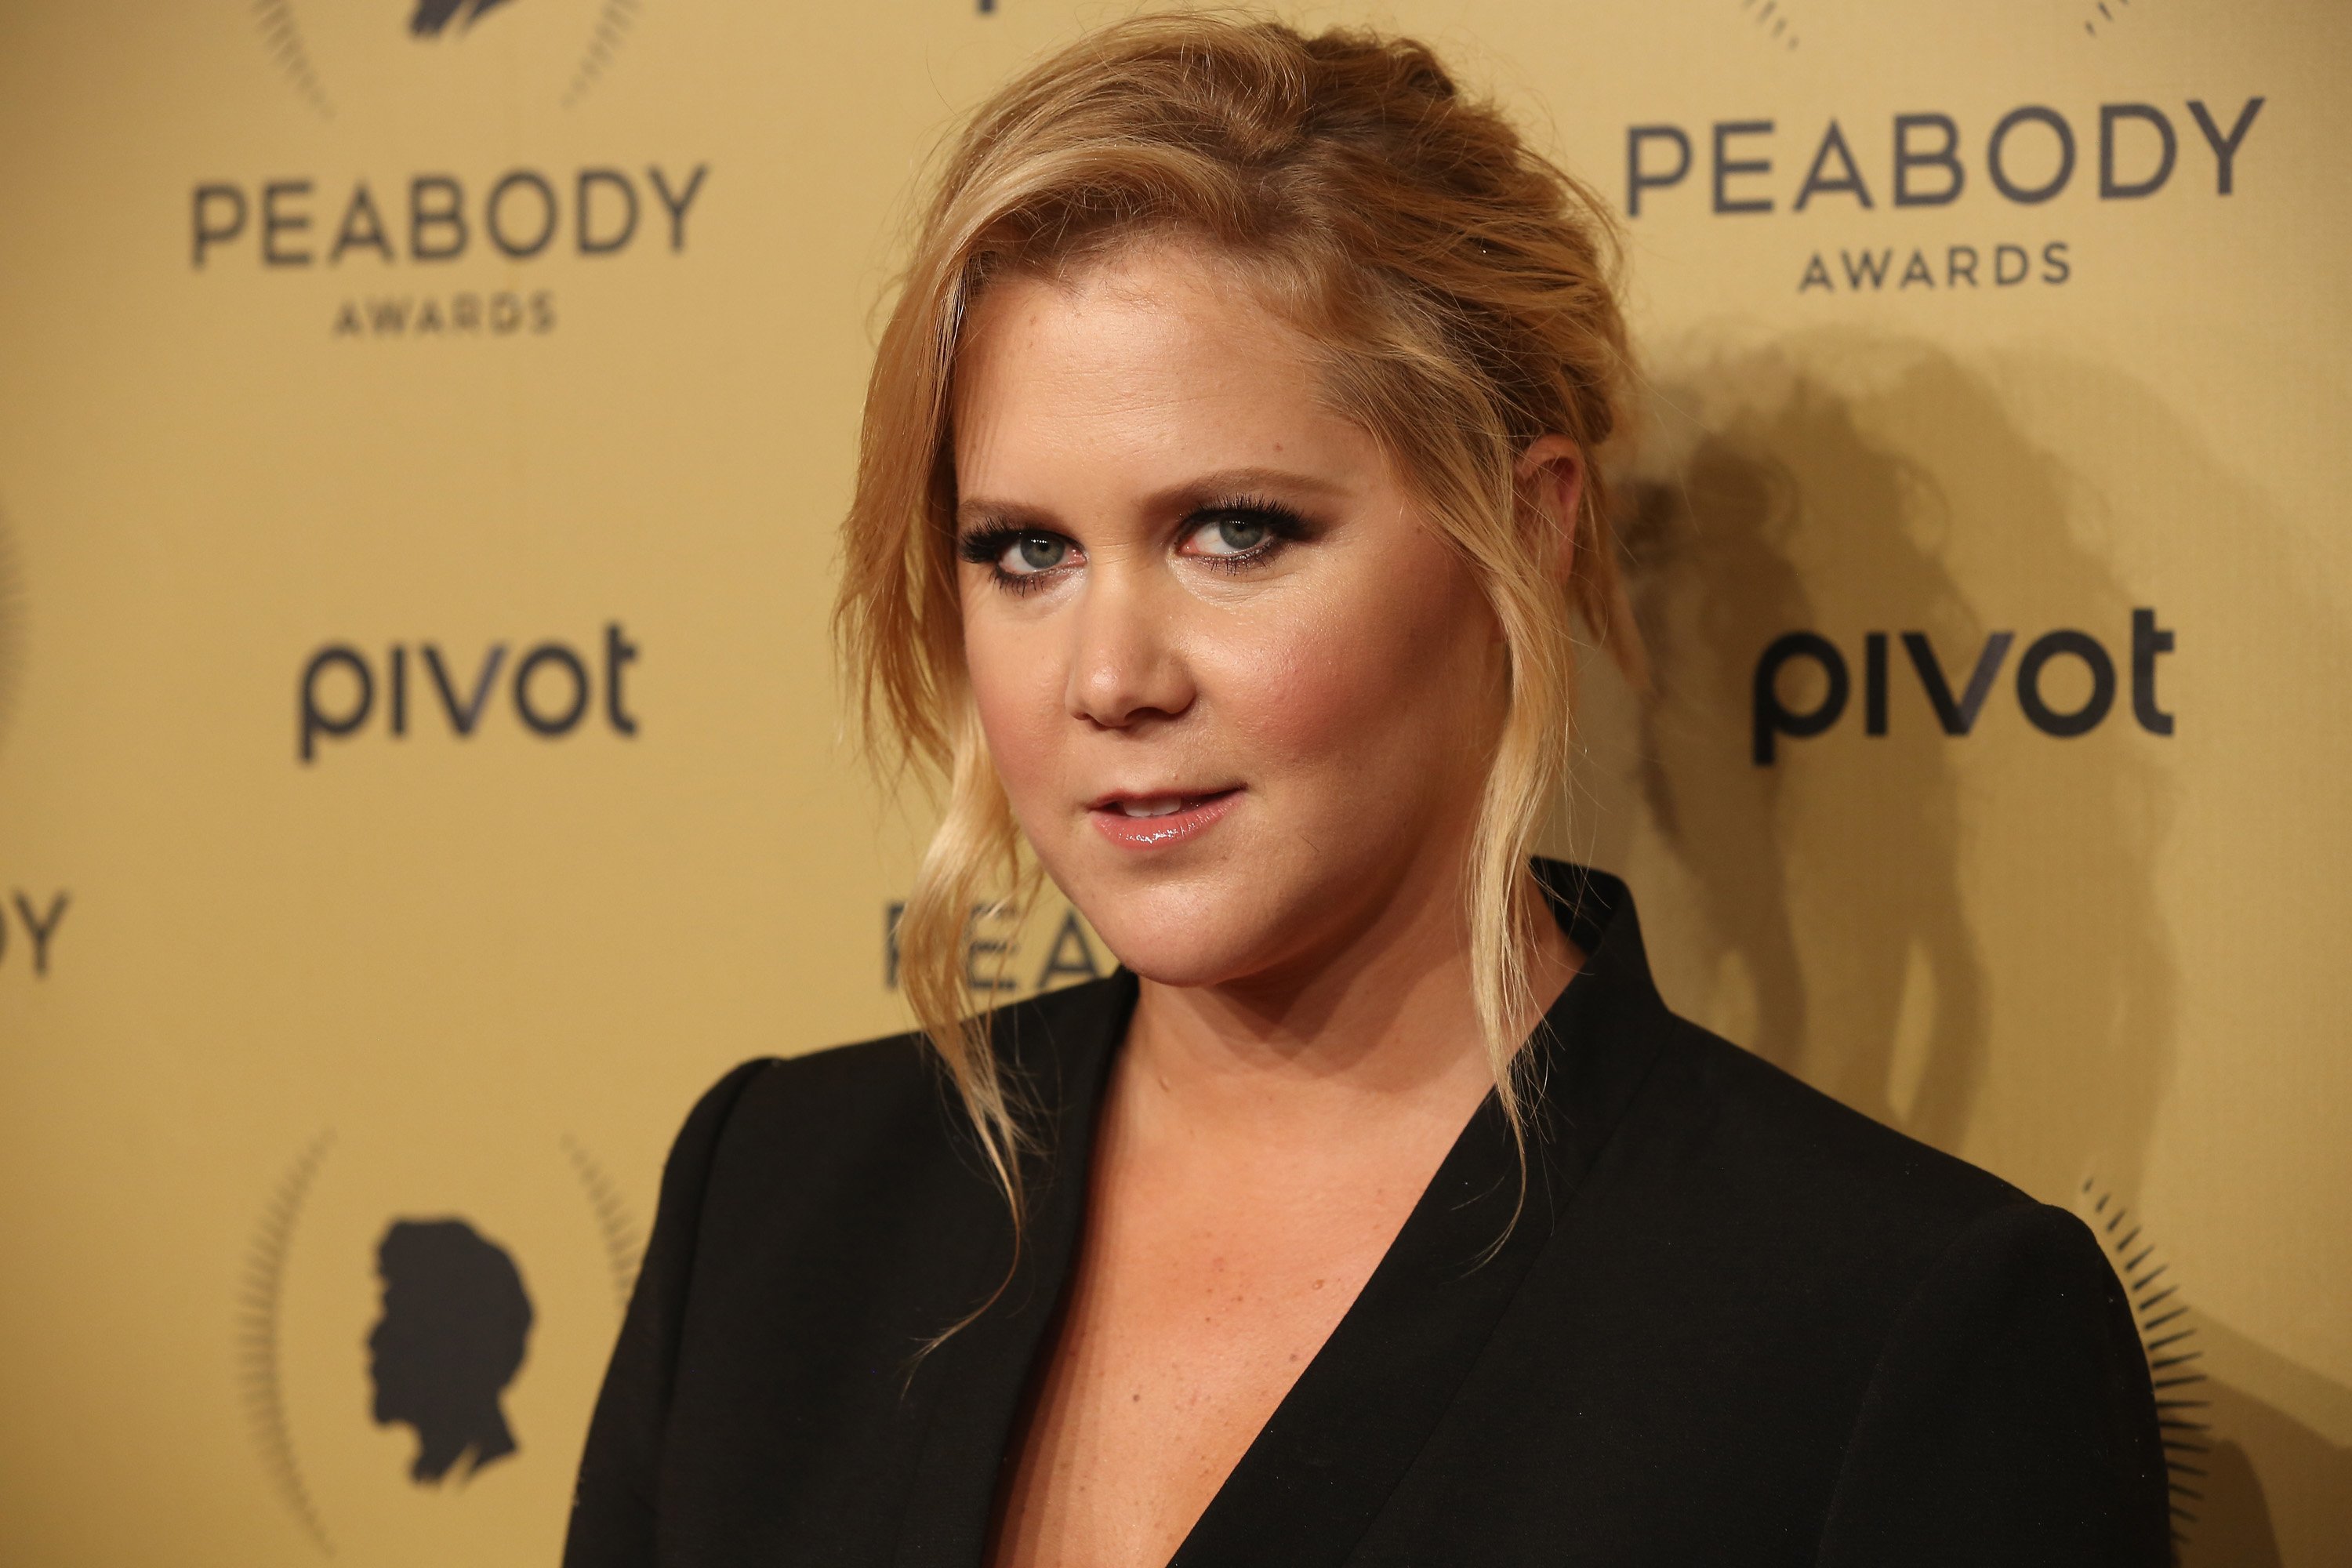 Amy Schumer attends The 74th Annual Peabody Awards Ceremony at Cipriani Wall Street on May 31, 2015, in New York City. | Source: Getty Images.